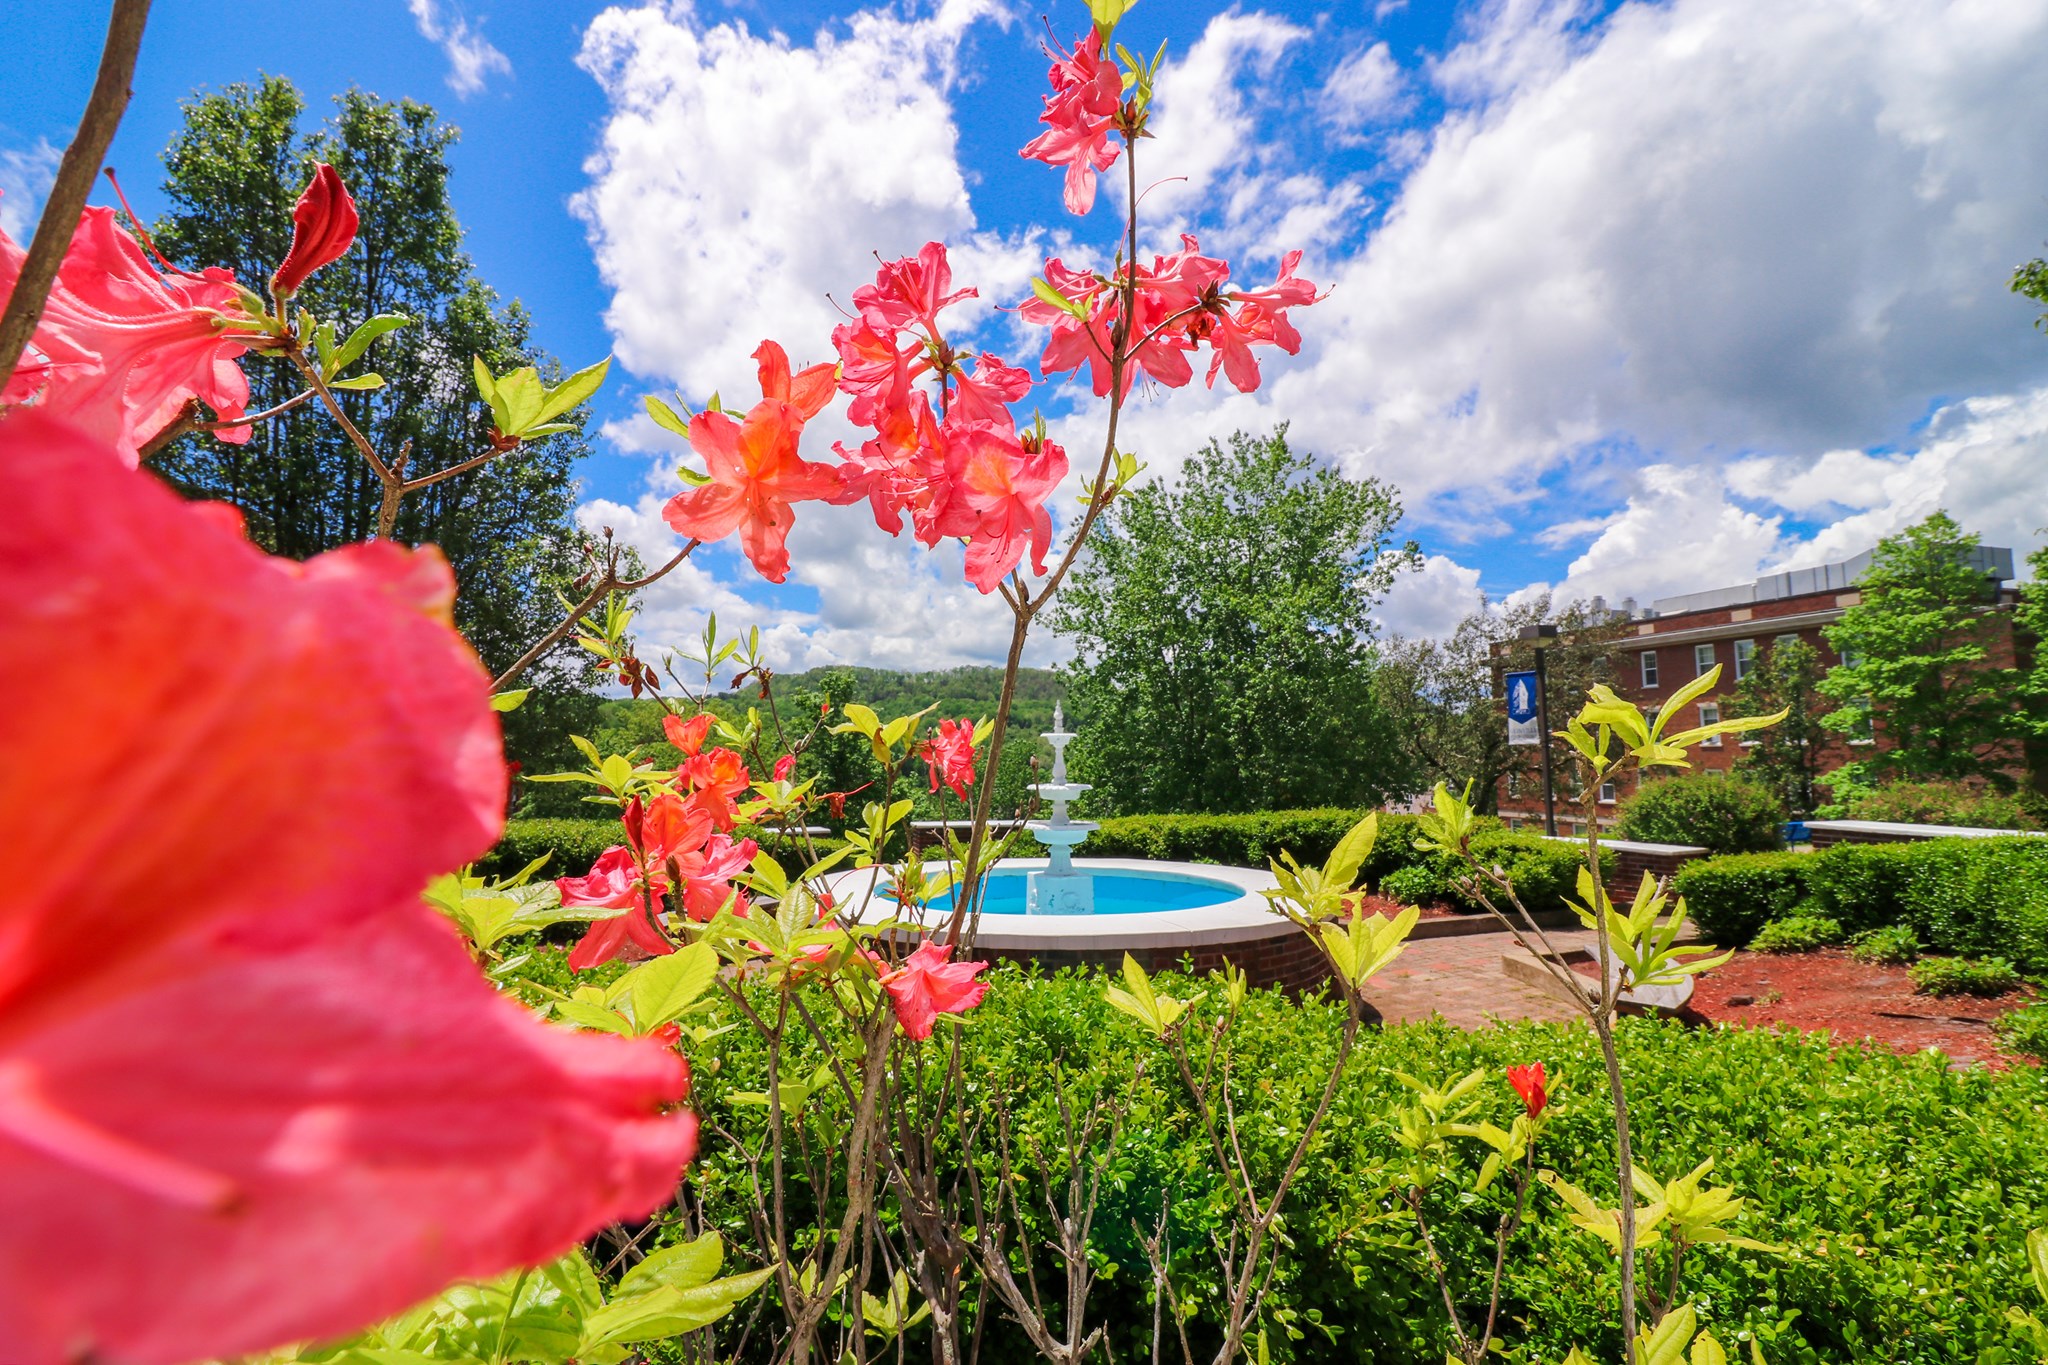 The Dora Heflin Garden is in full bloom with magenta flowers framing the photo. In the center is a white, three-tiered fountain flowing into a turquoise pool shaped like a wishing well.